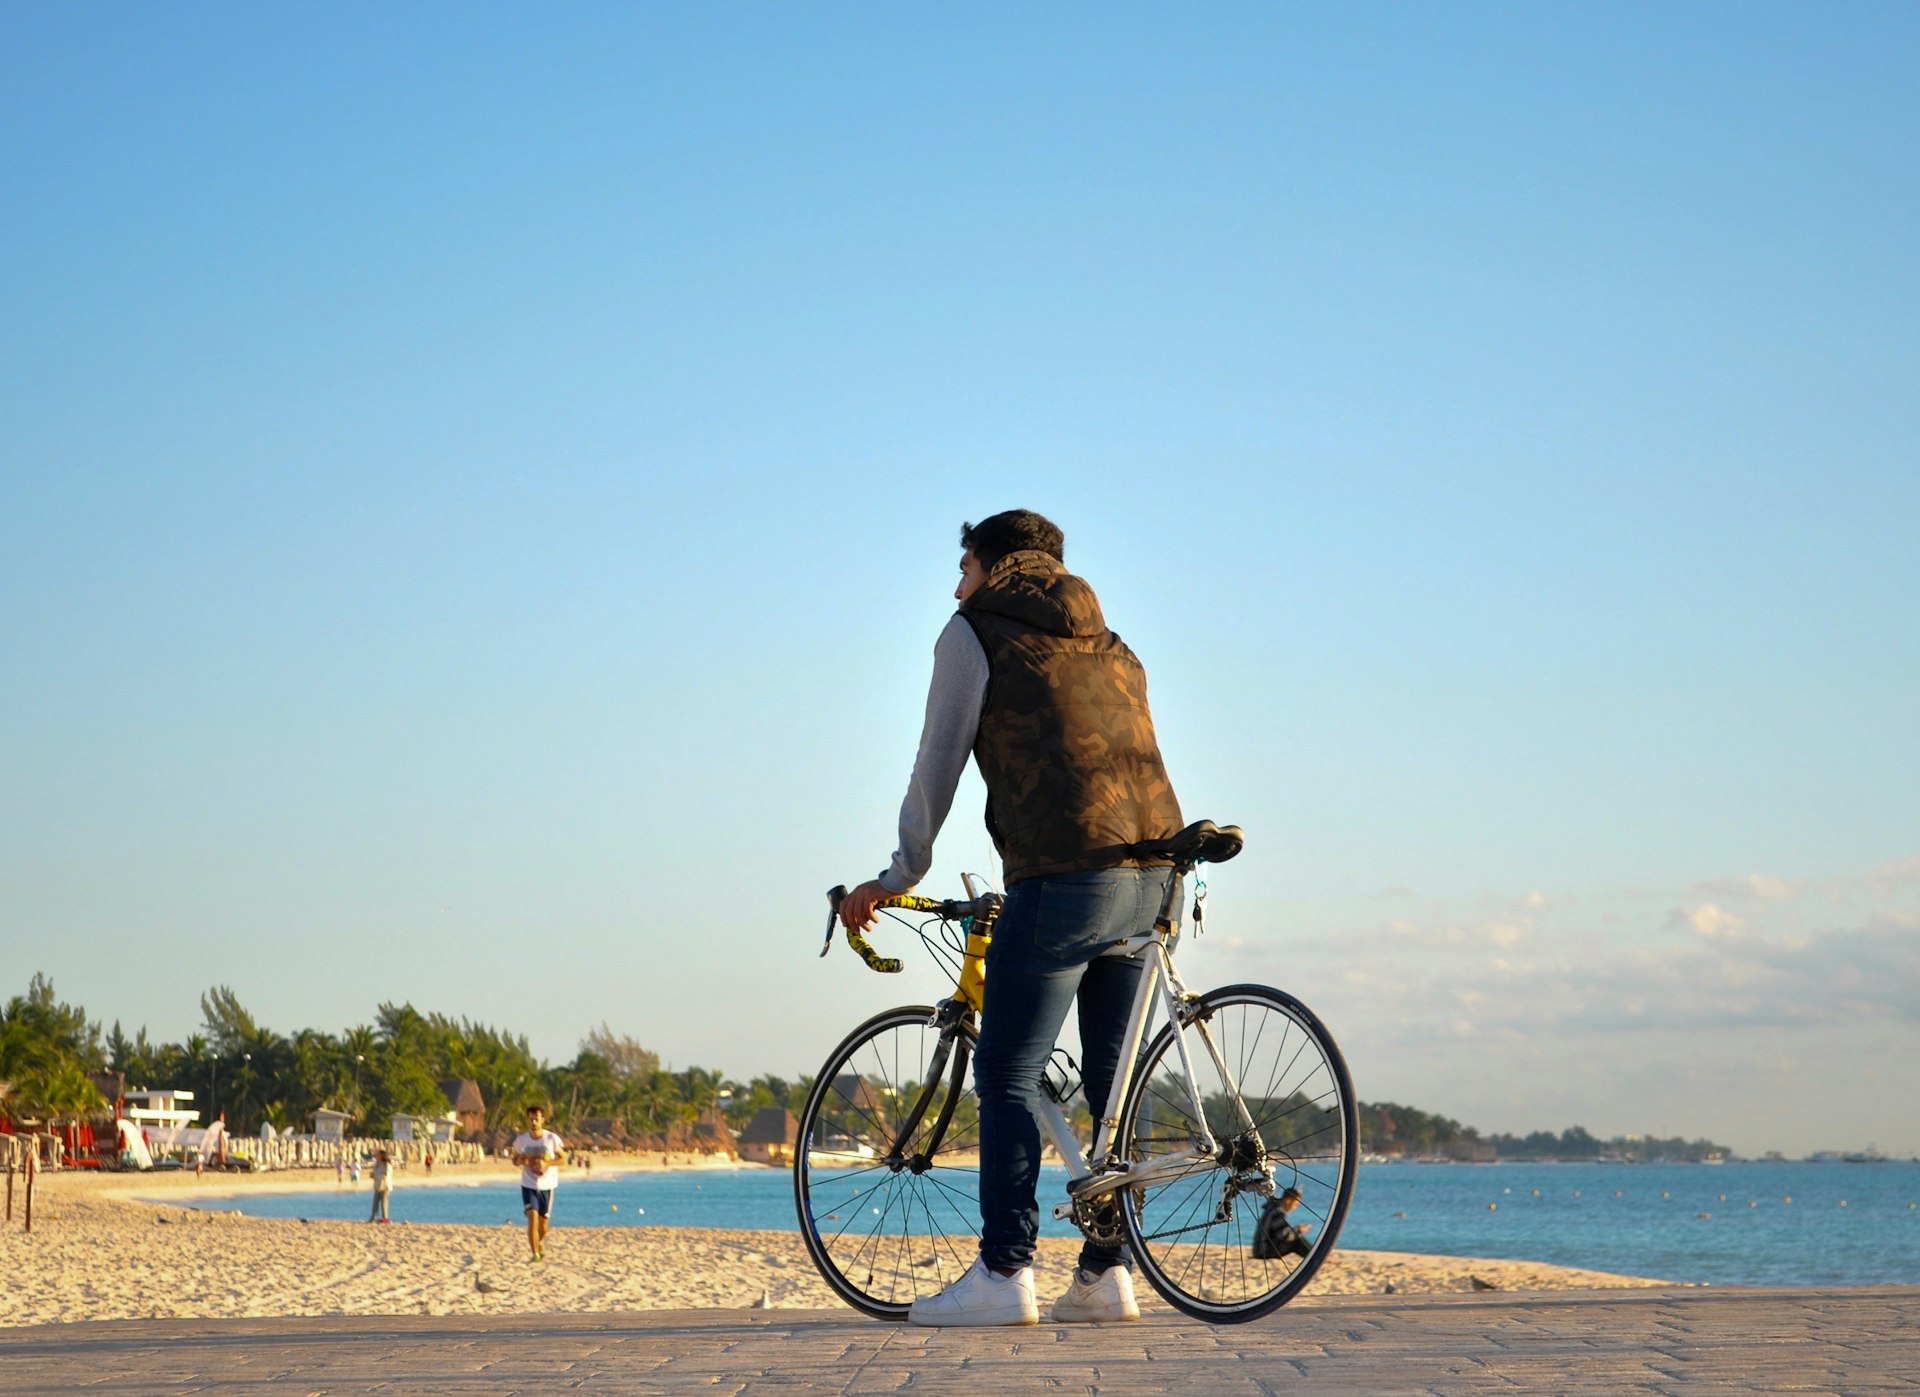 Young male standing on the beach with his bike with ocean and sky in the background, Playa del Carmen